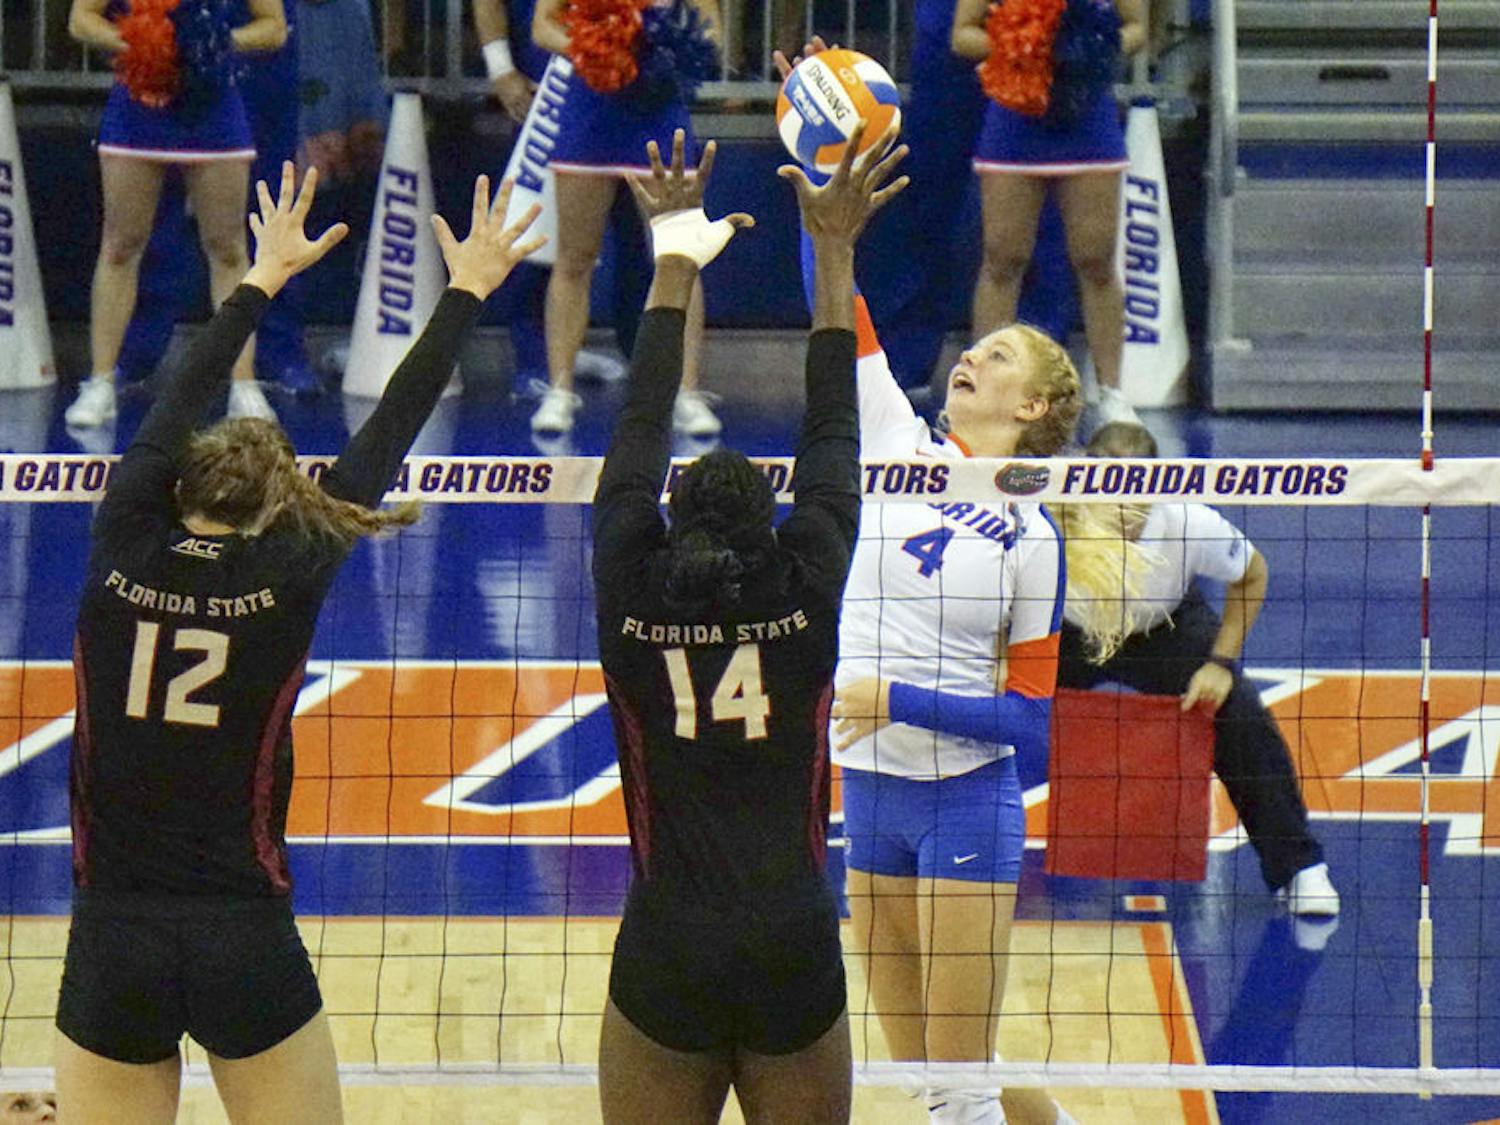 UF outside hitter Carli Snyder swings for a kill attempt during Florida's 3-1 win on Sept. 20, 2015, in the O'Connell Center.